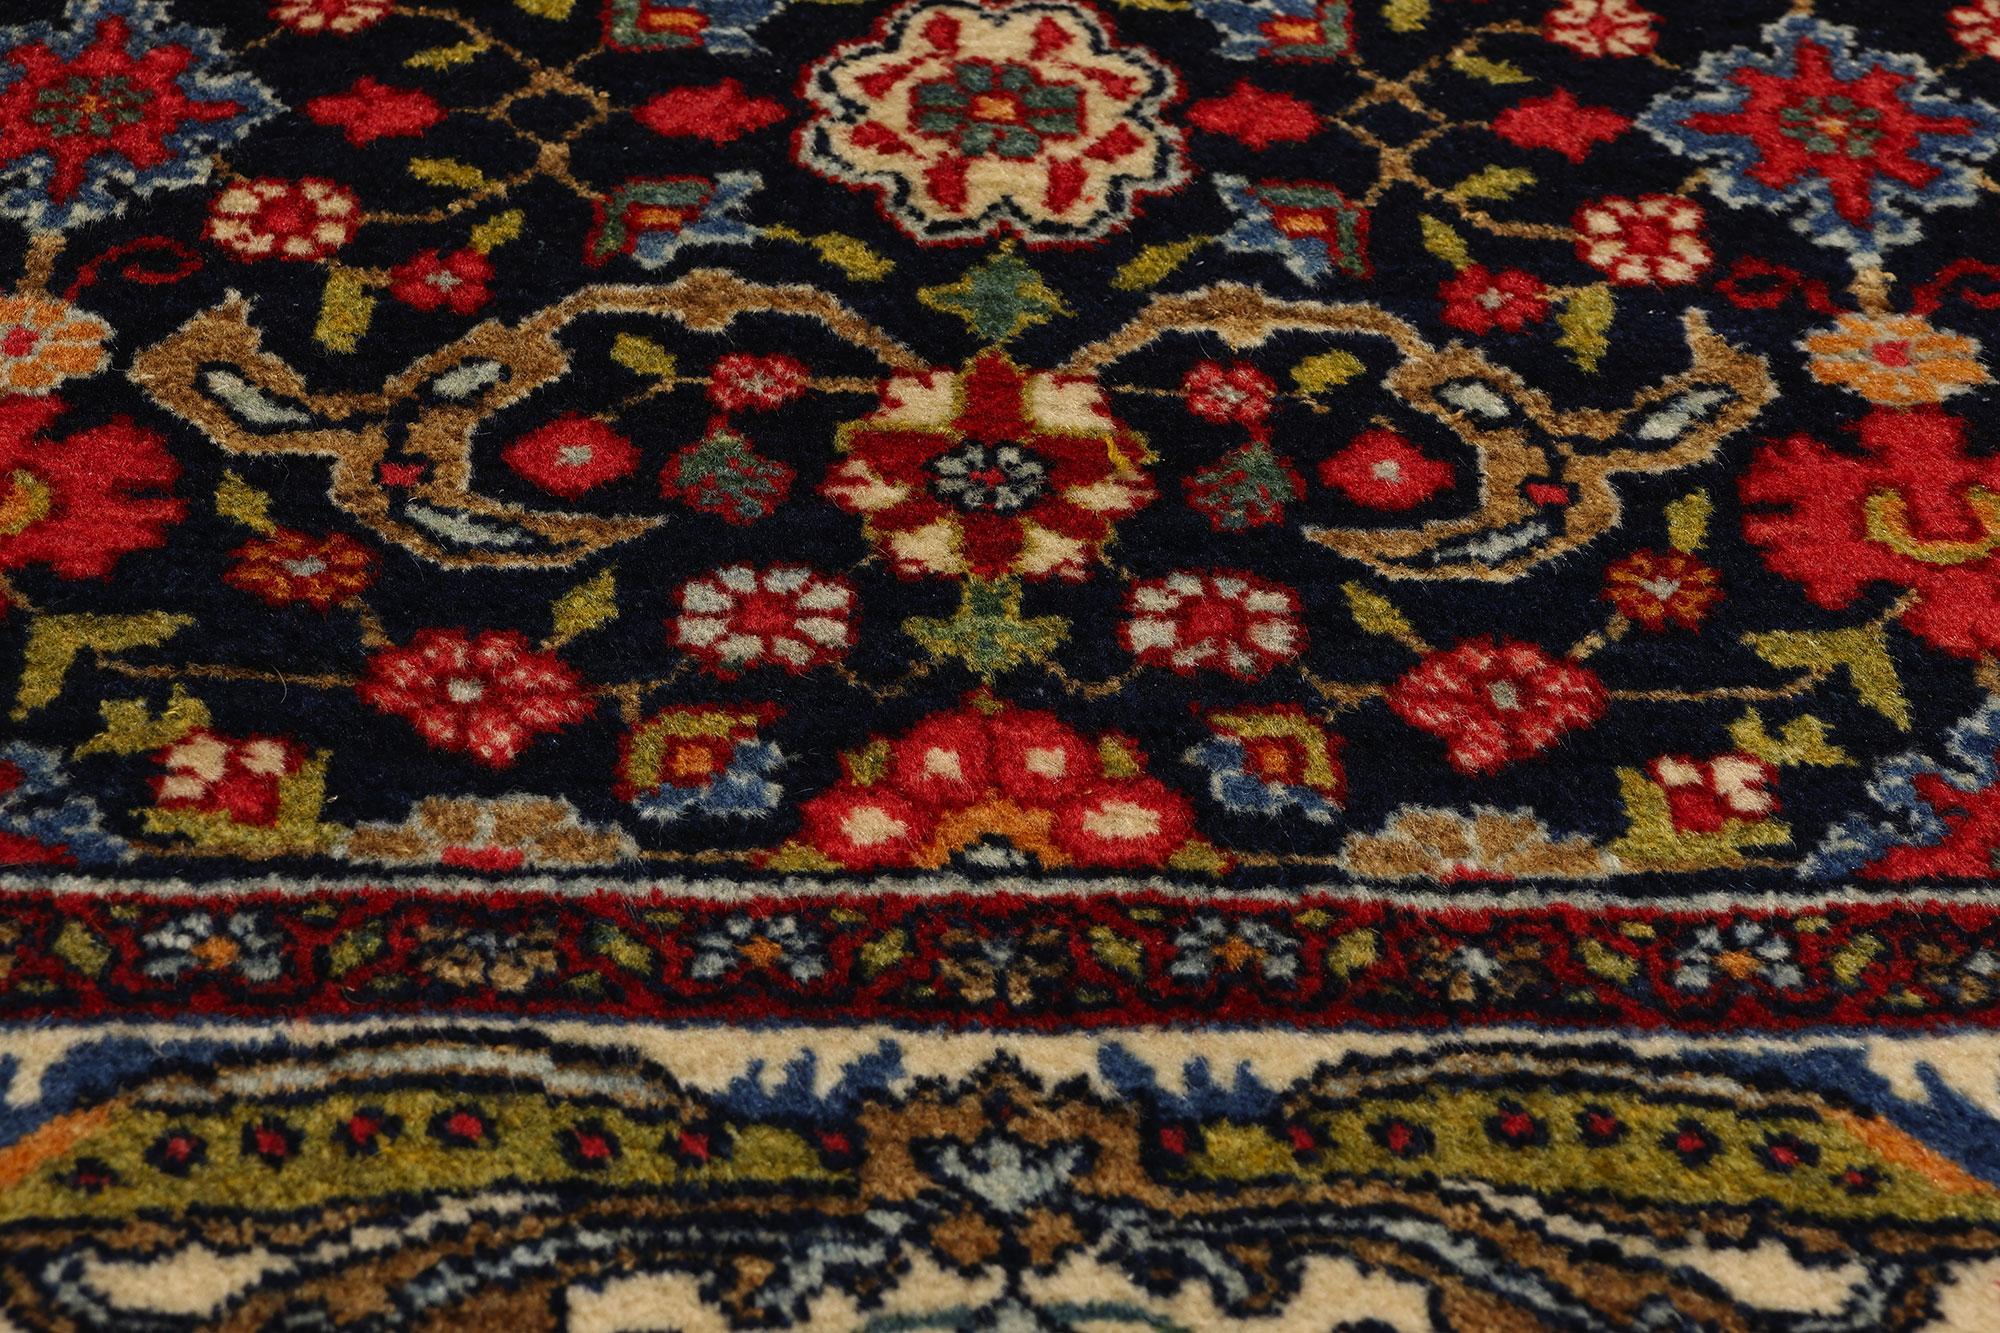 Antique Persian Bijar Rug with Allover Mina Khani In Good Condition For Sale In Dallas, TX